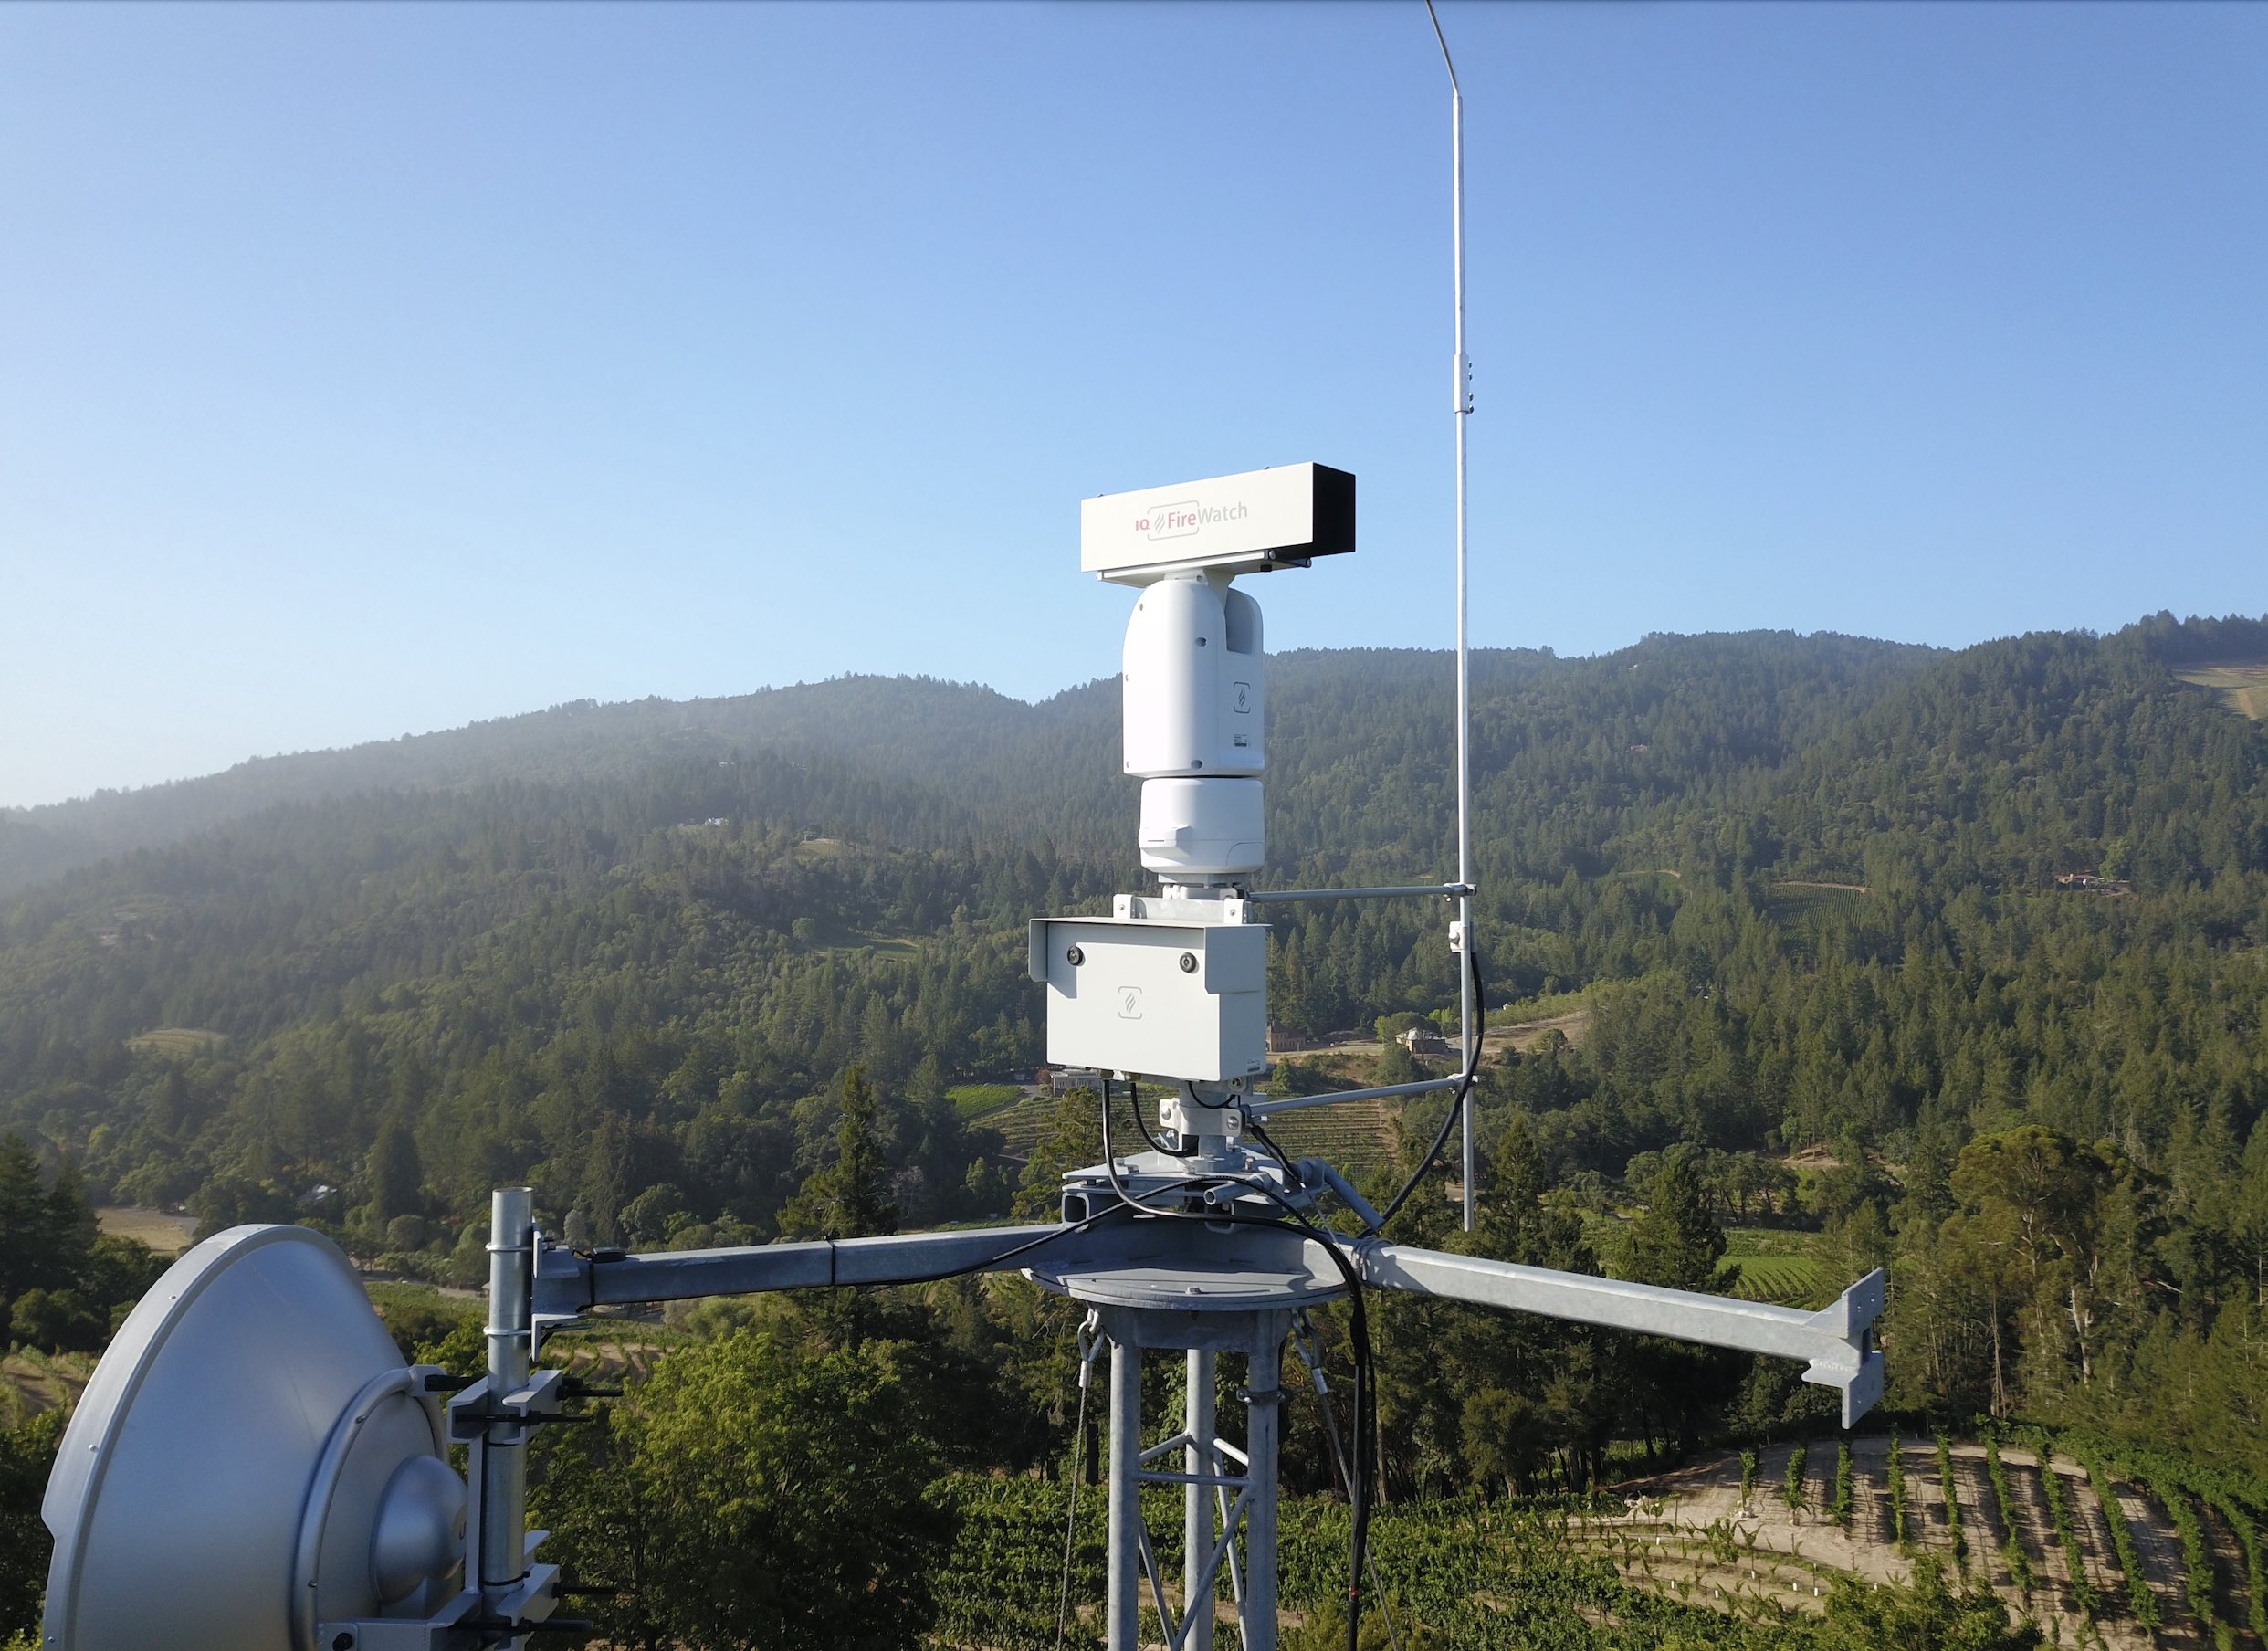 IQ FireWatch is an artificial intelligence-based system that uses optical and heat sensors to detect fires day or night; it sends an immediate alert notification with images to authorities.